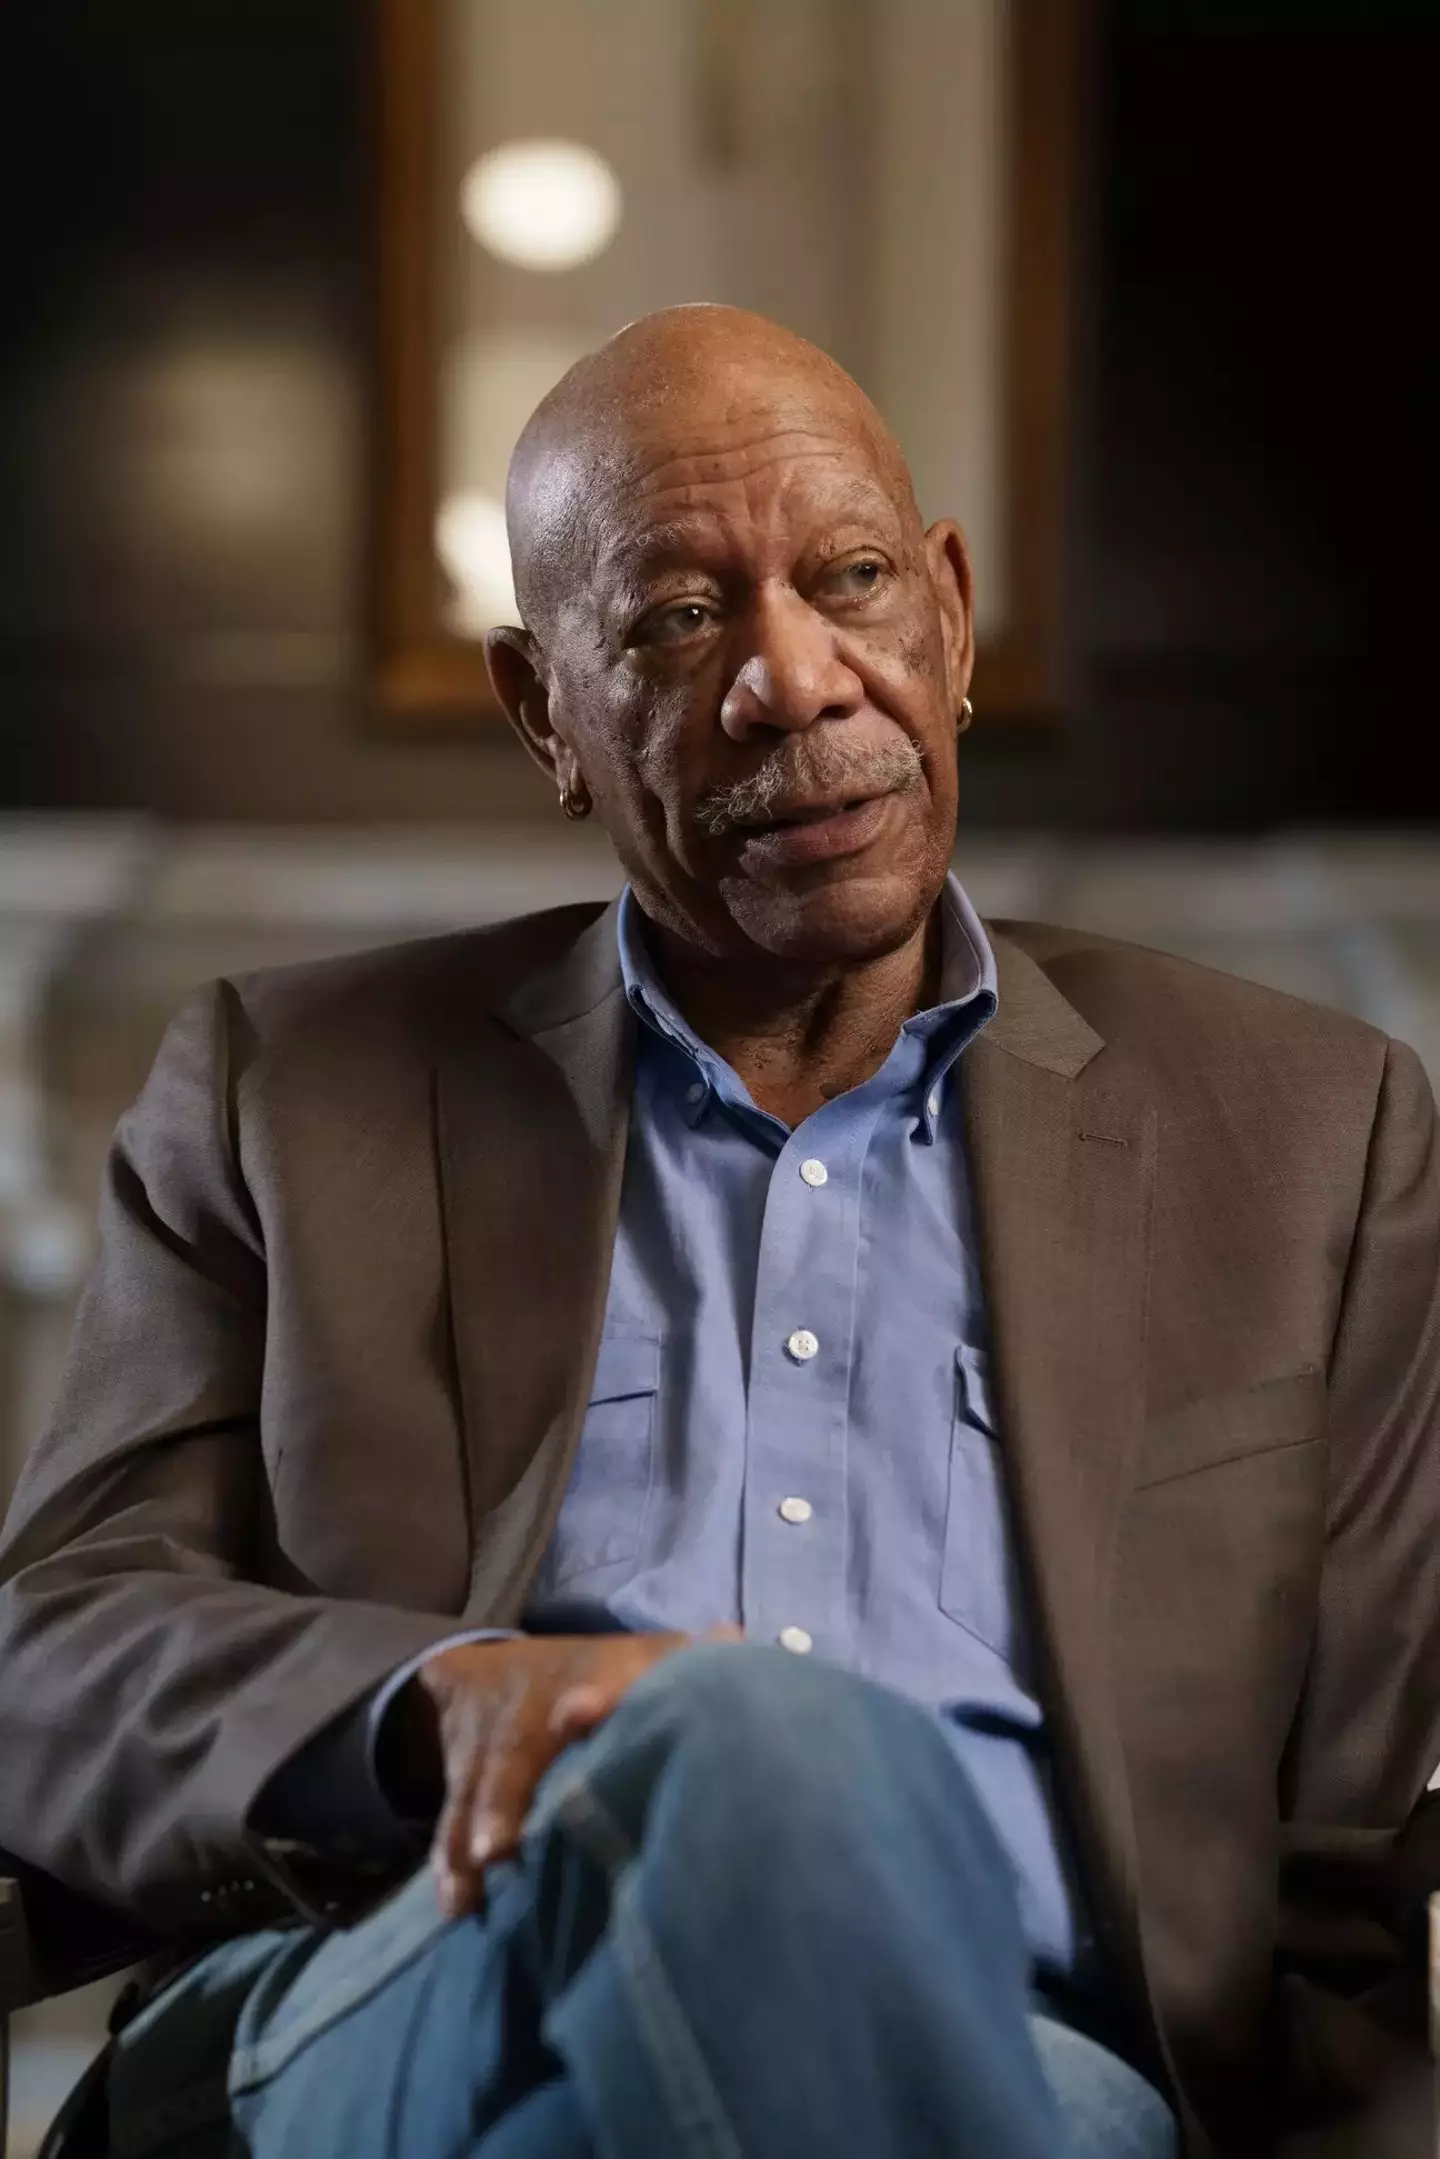 Morgan Freeman was impressed with his acting in A Good Person.